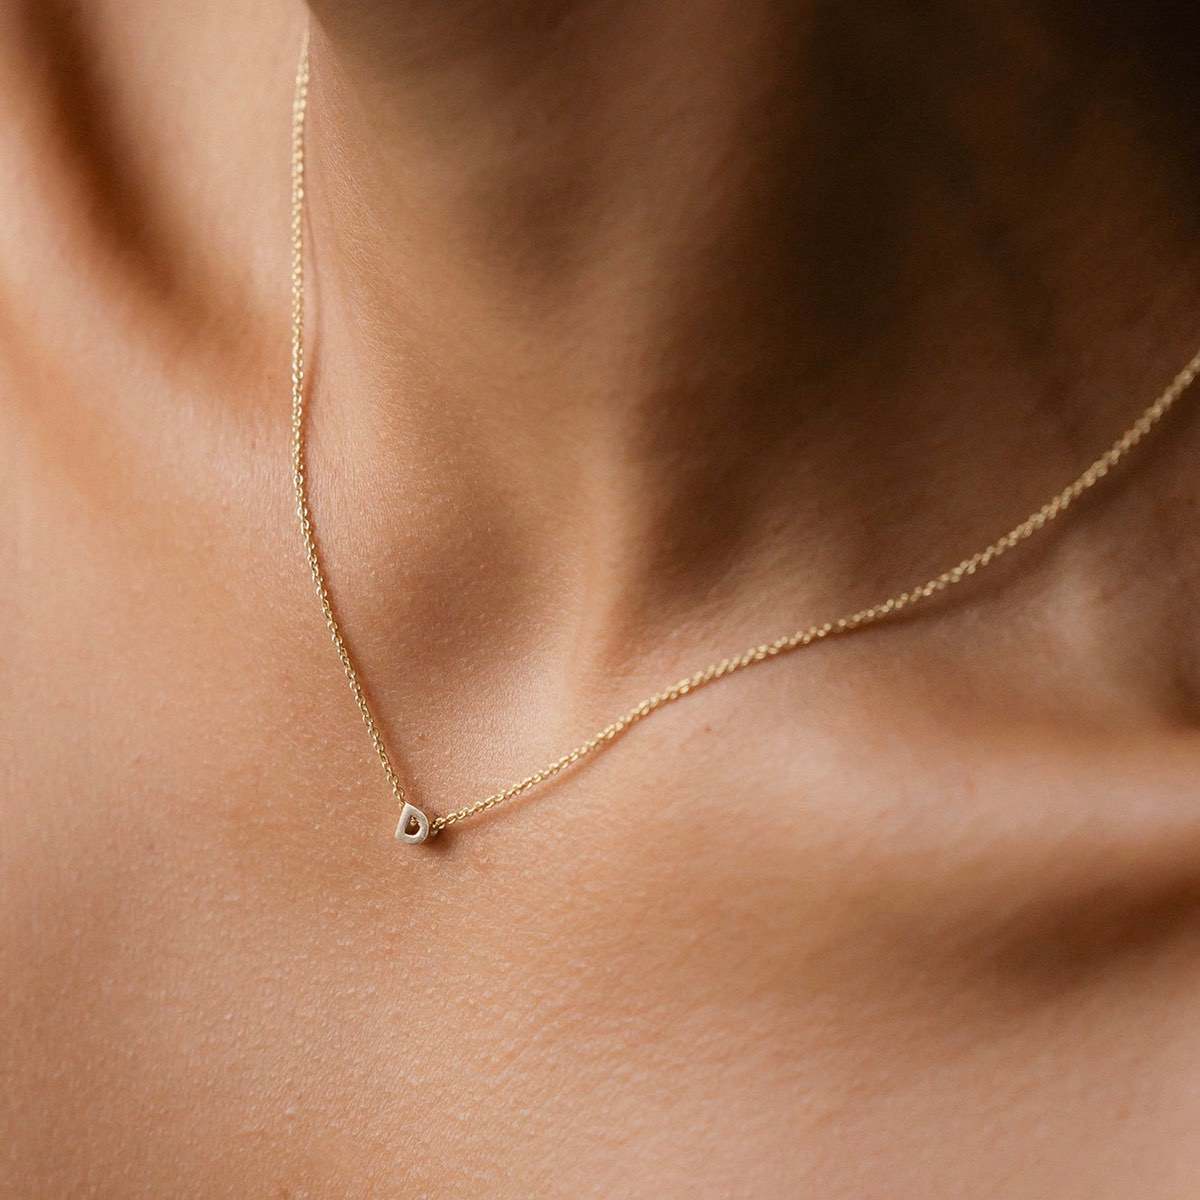 Hand finished solid gold letter necklace: Close up of a model wearing our beautiful 9ct yellow gold Tiny Letter D Charm Necklace with a 40cm cable chain